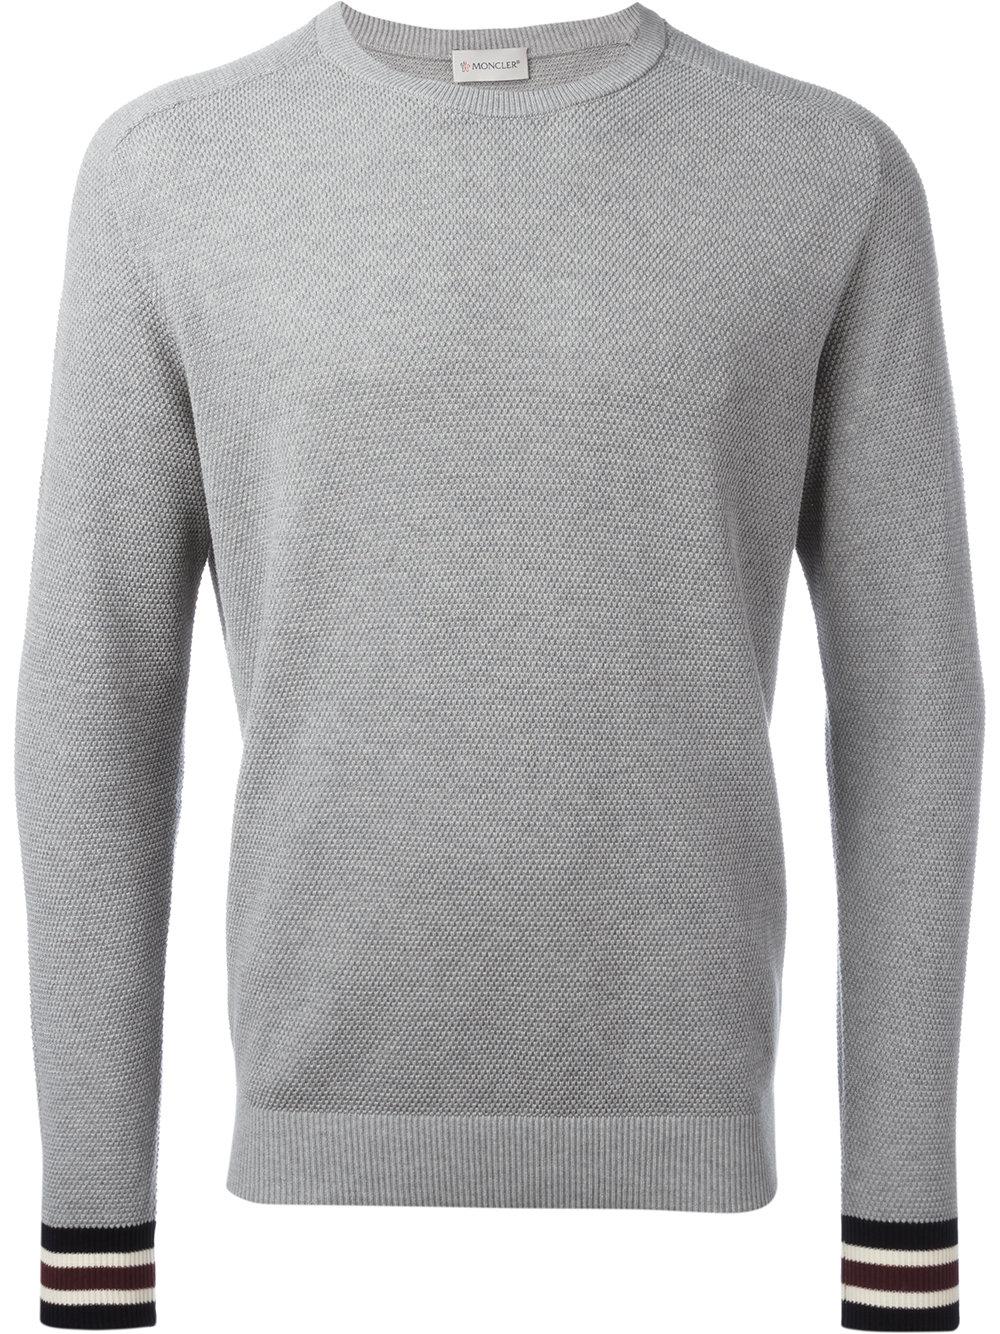 Moncler Cotton Striped Cuffs Jumper in Grey (Grey) for Men - Lyst